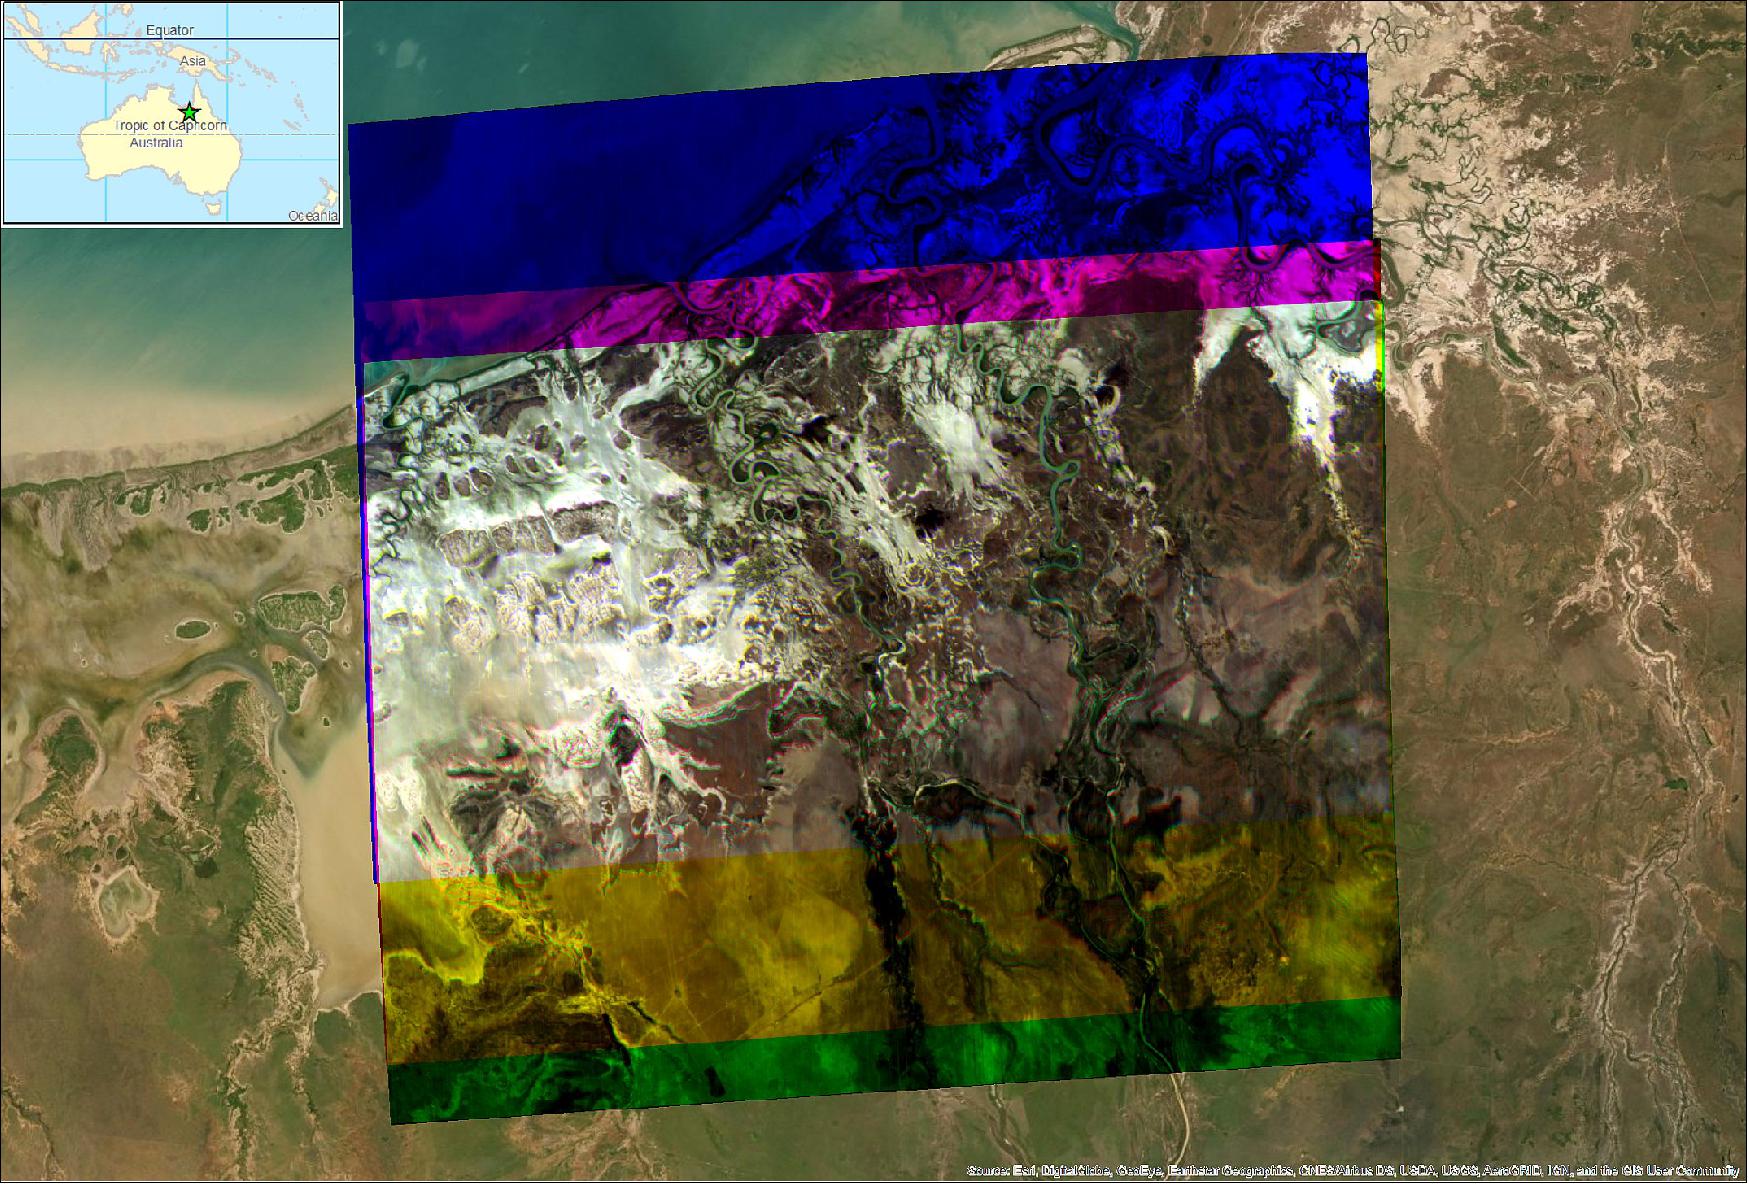 Figure 13: Overlap region of the R3 red, green and blue bands from the 19 August, 2019, 1000-frame northern Australian coast imaging experiment (image credit: Aerospace)